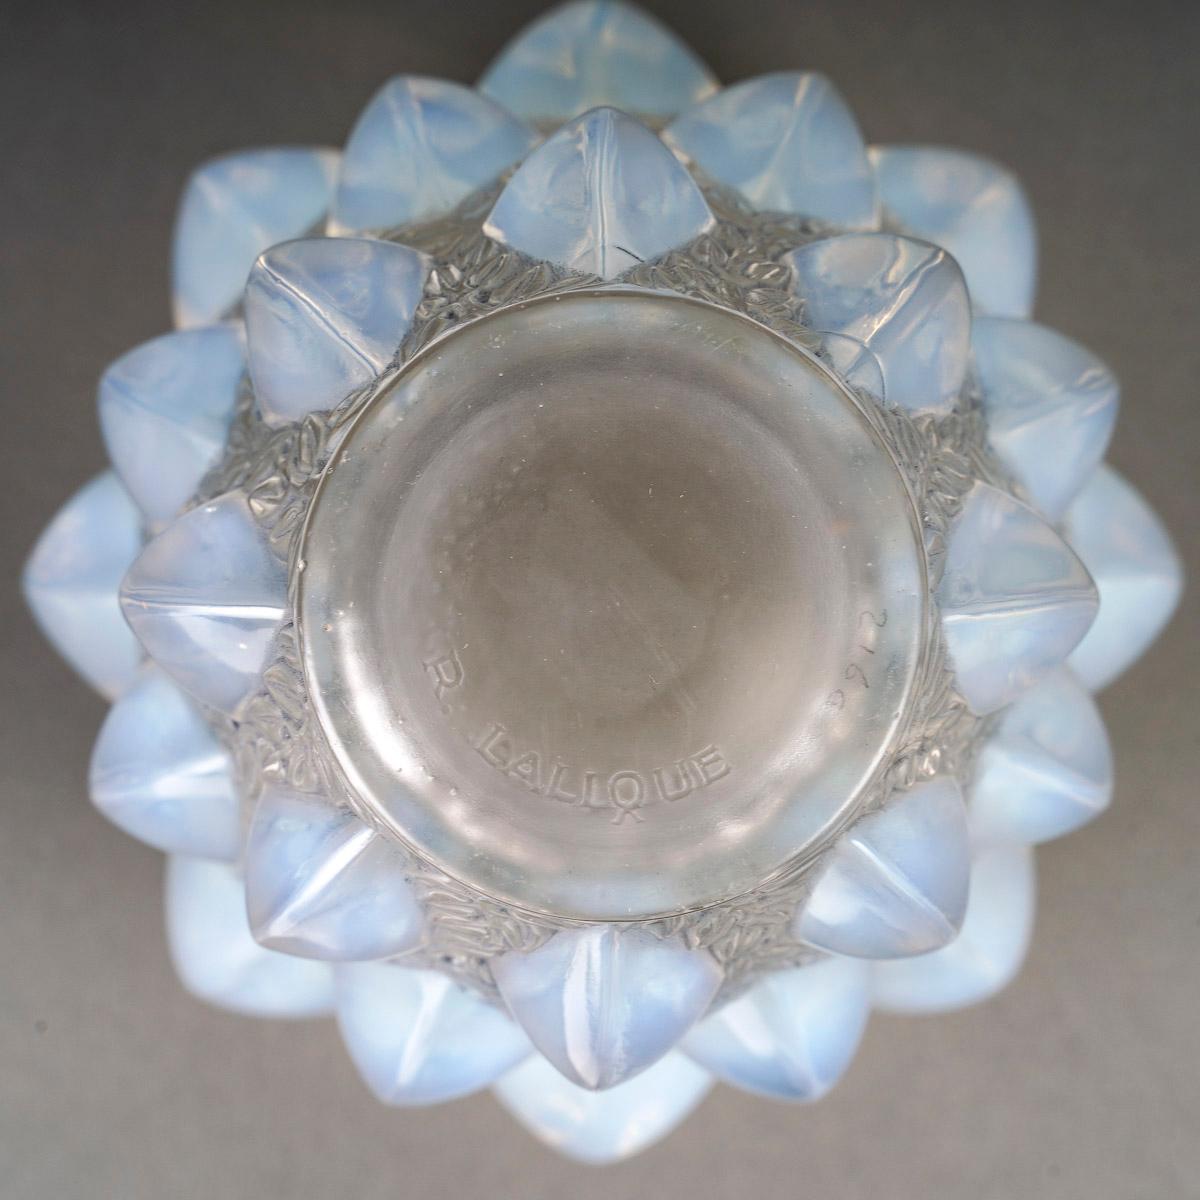 Molded 1927 Rene Lalique Vase Rampillon Opalescent Glass Grey Patina For Sale